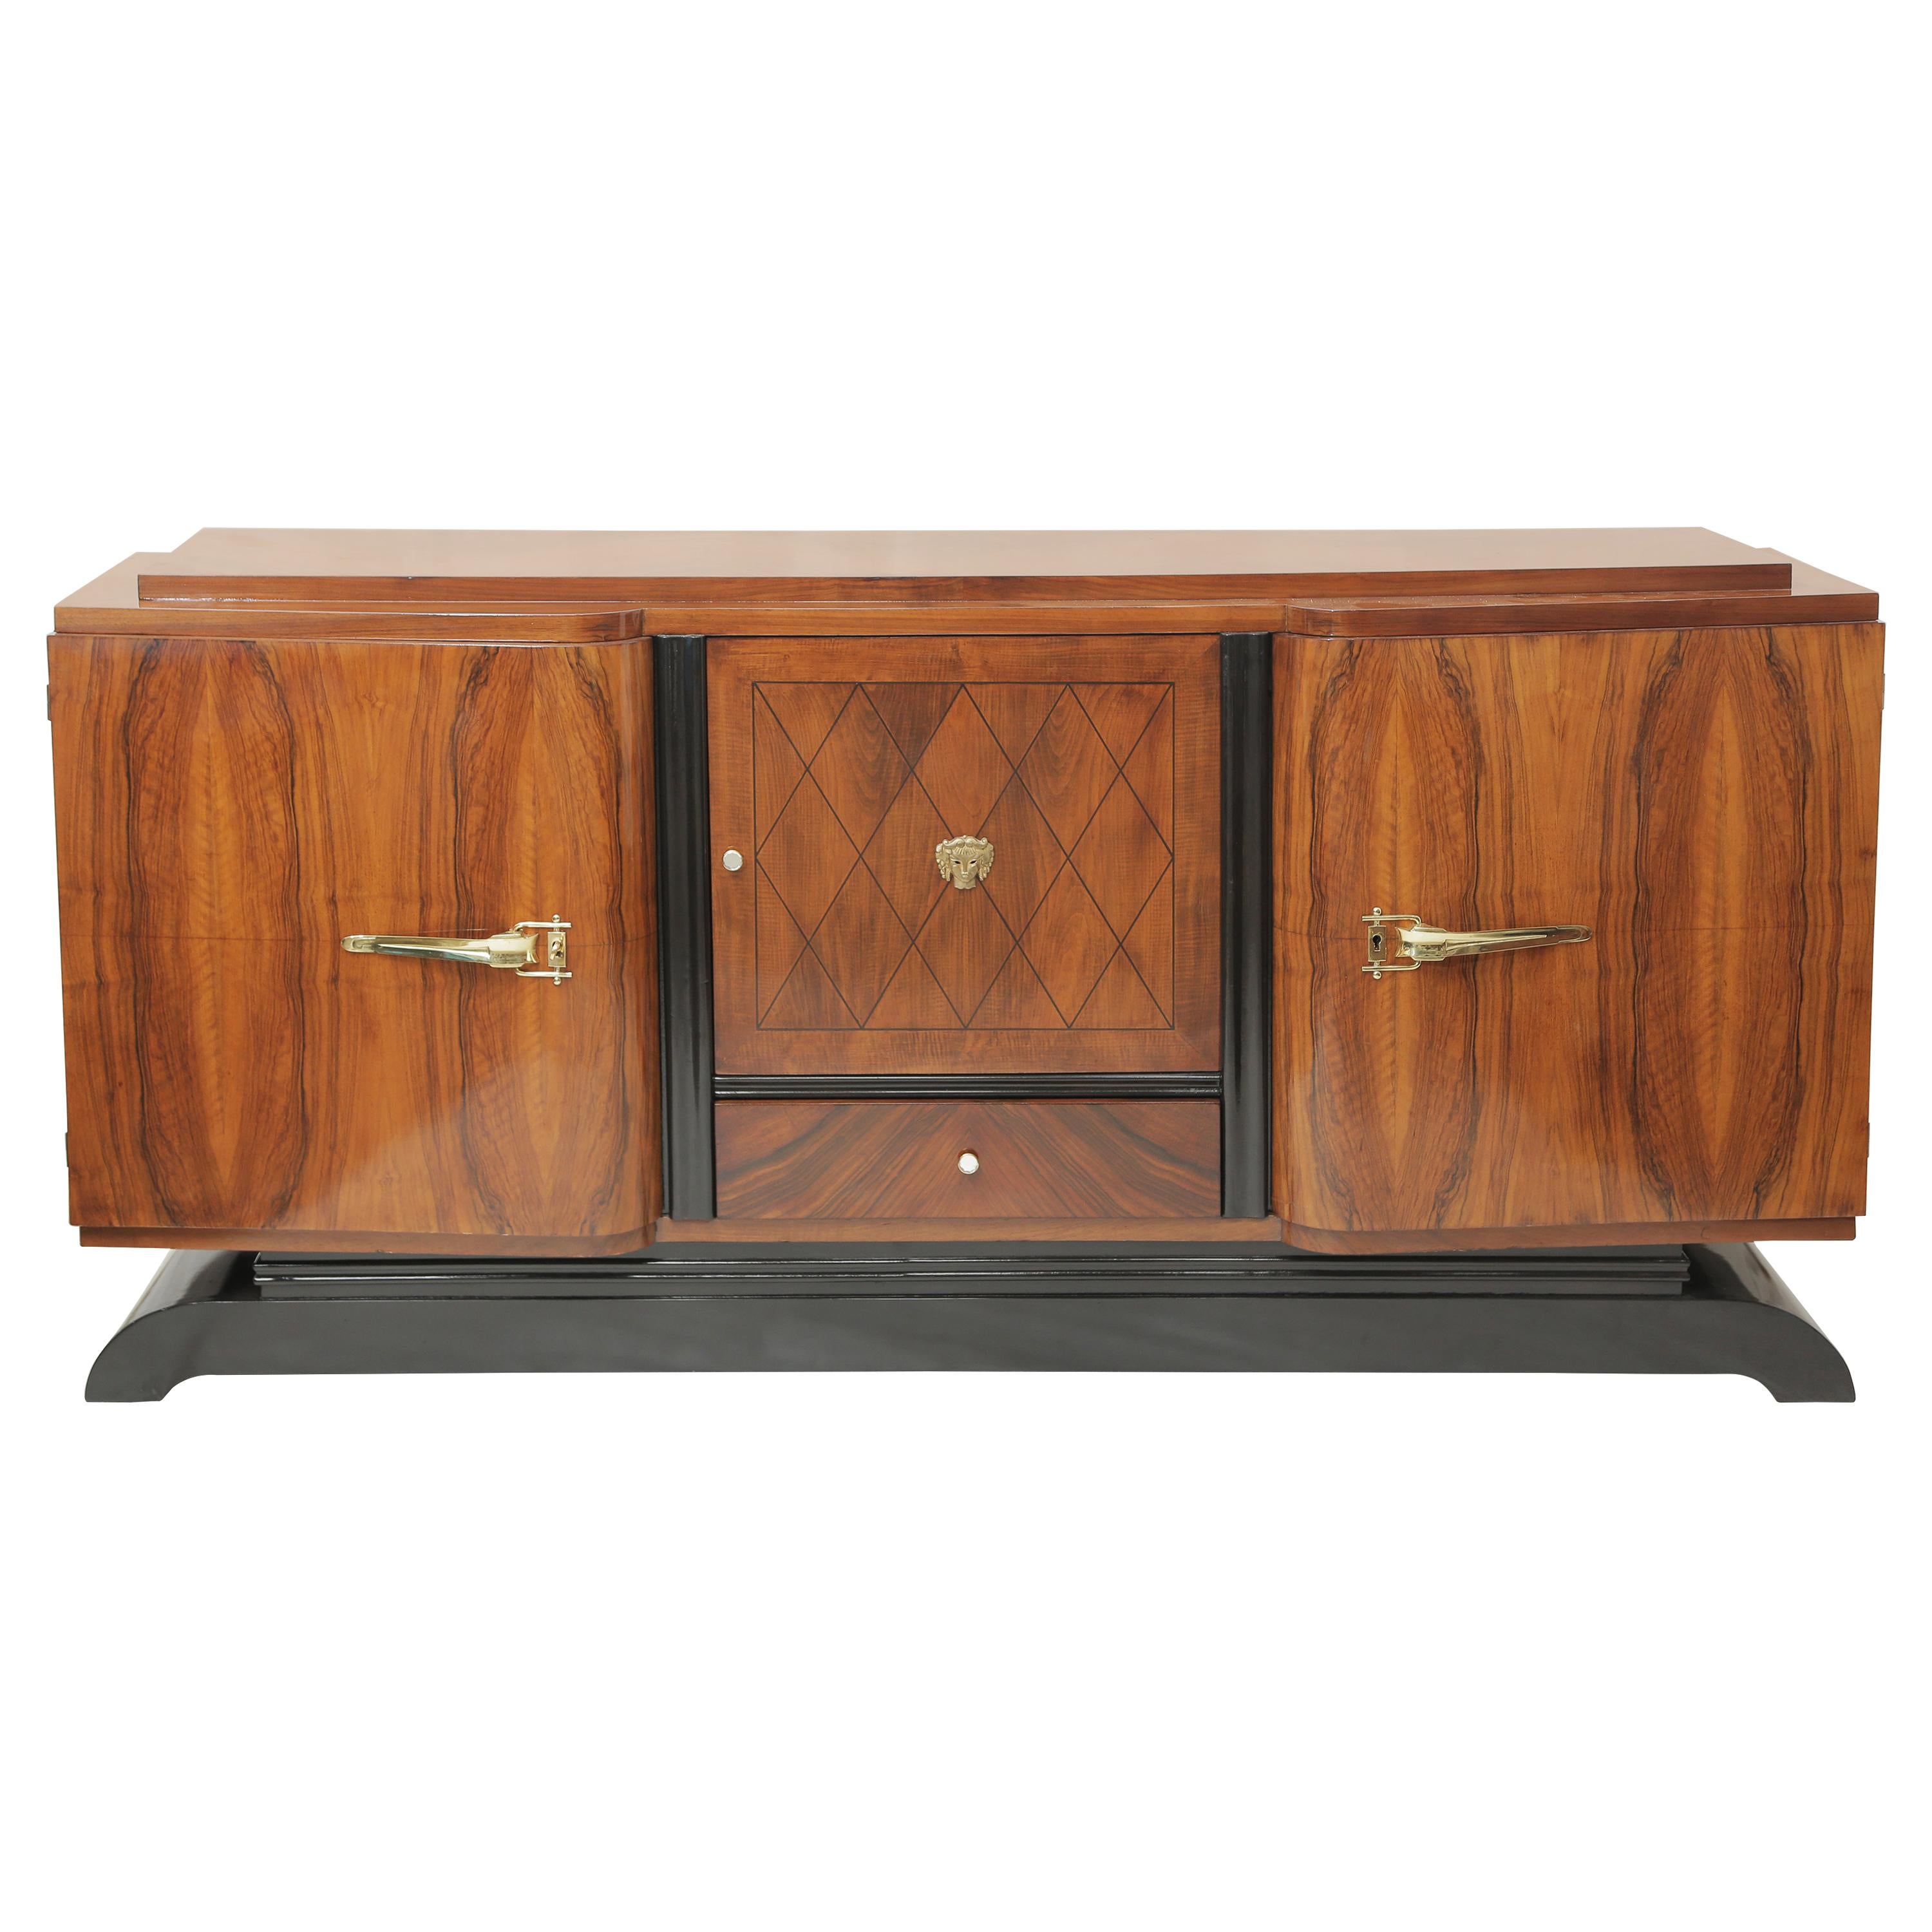 French Art Deco Blonde Mahogany Sideboard with Sycamore Veneer on the Inside